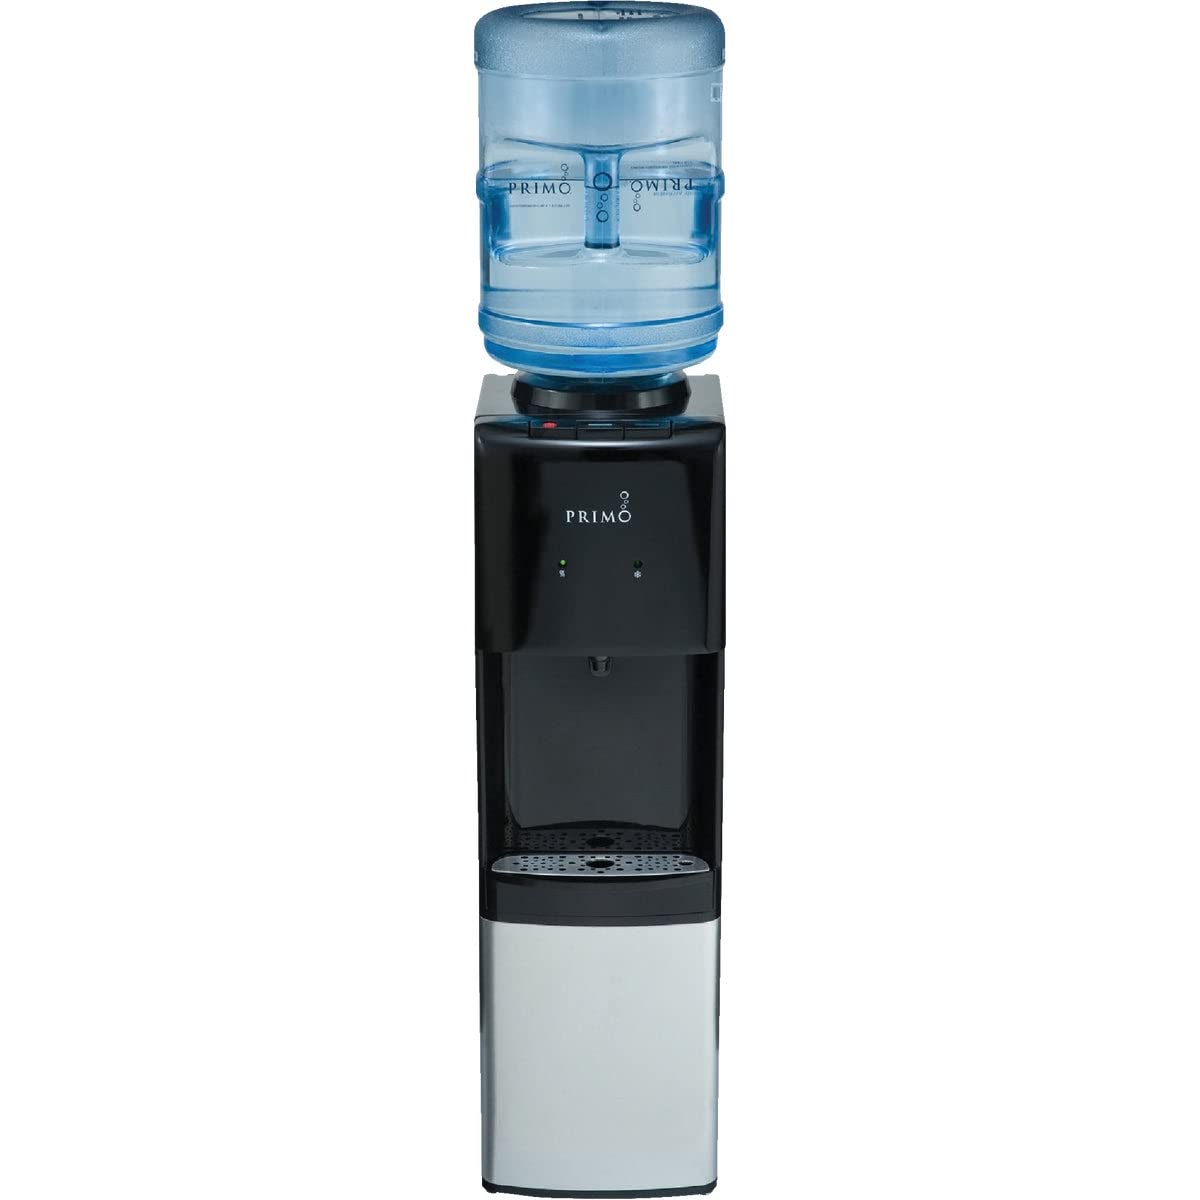 How To Take Off Childproof Hot Water Button On Primo Water Dispenser